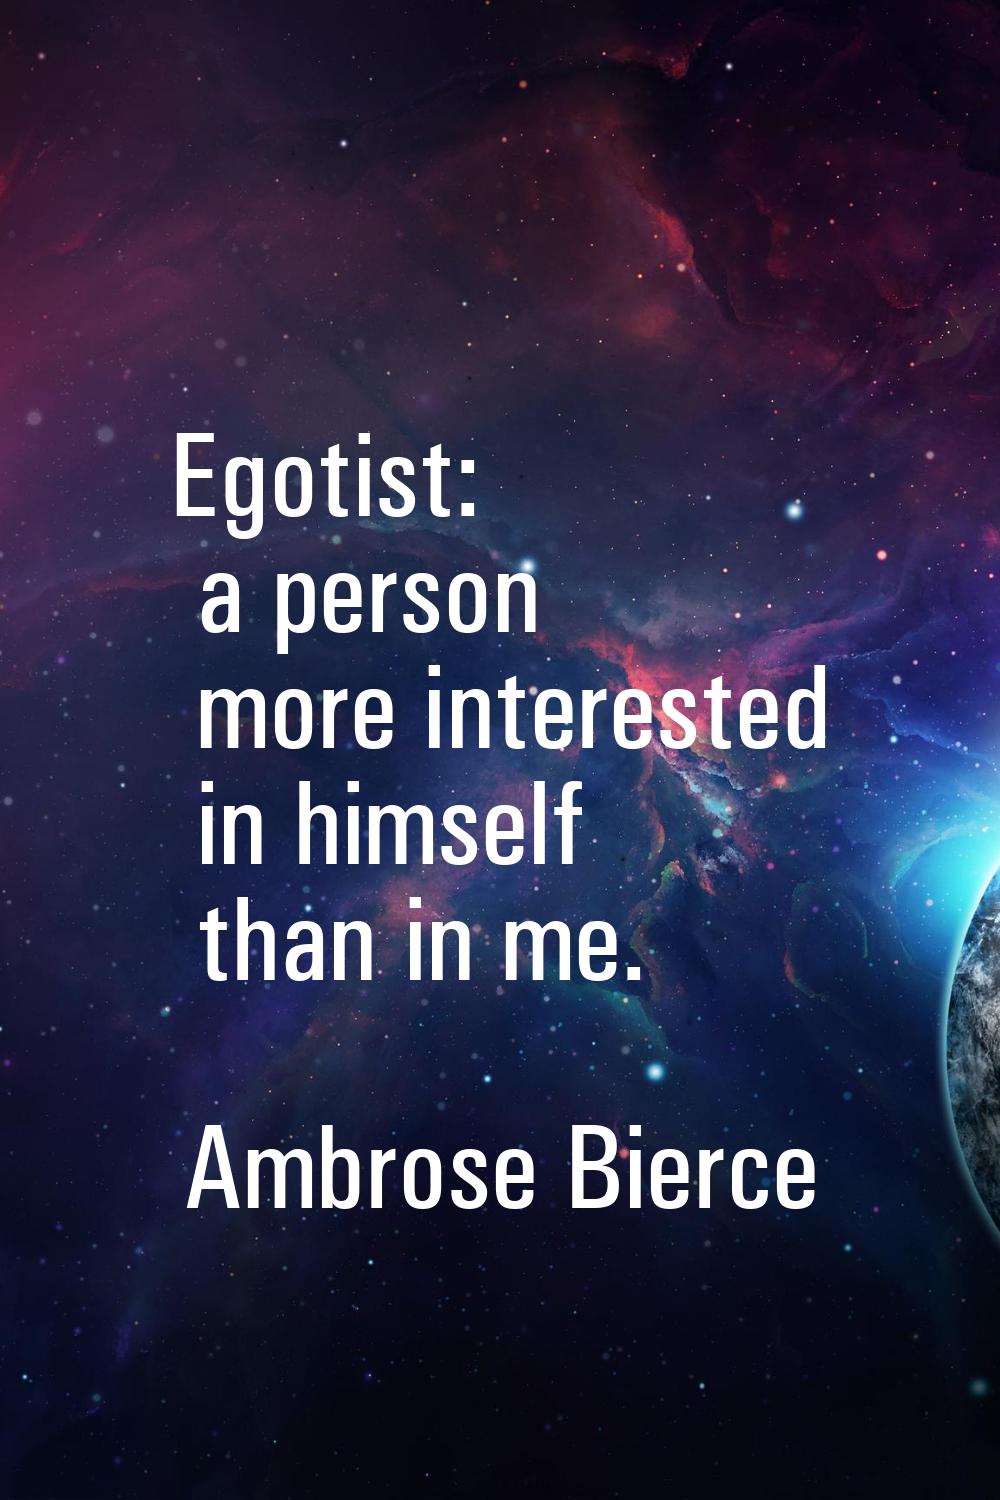 Egotist: a person more interested in himself than in me.